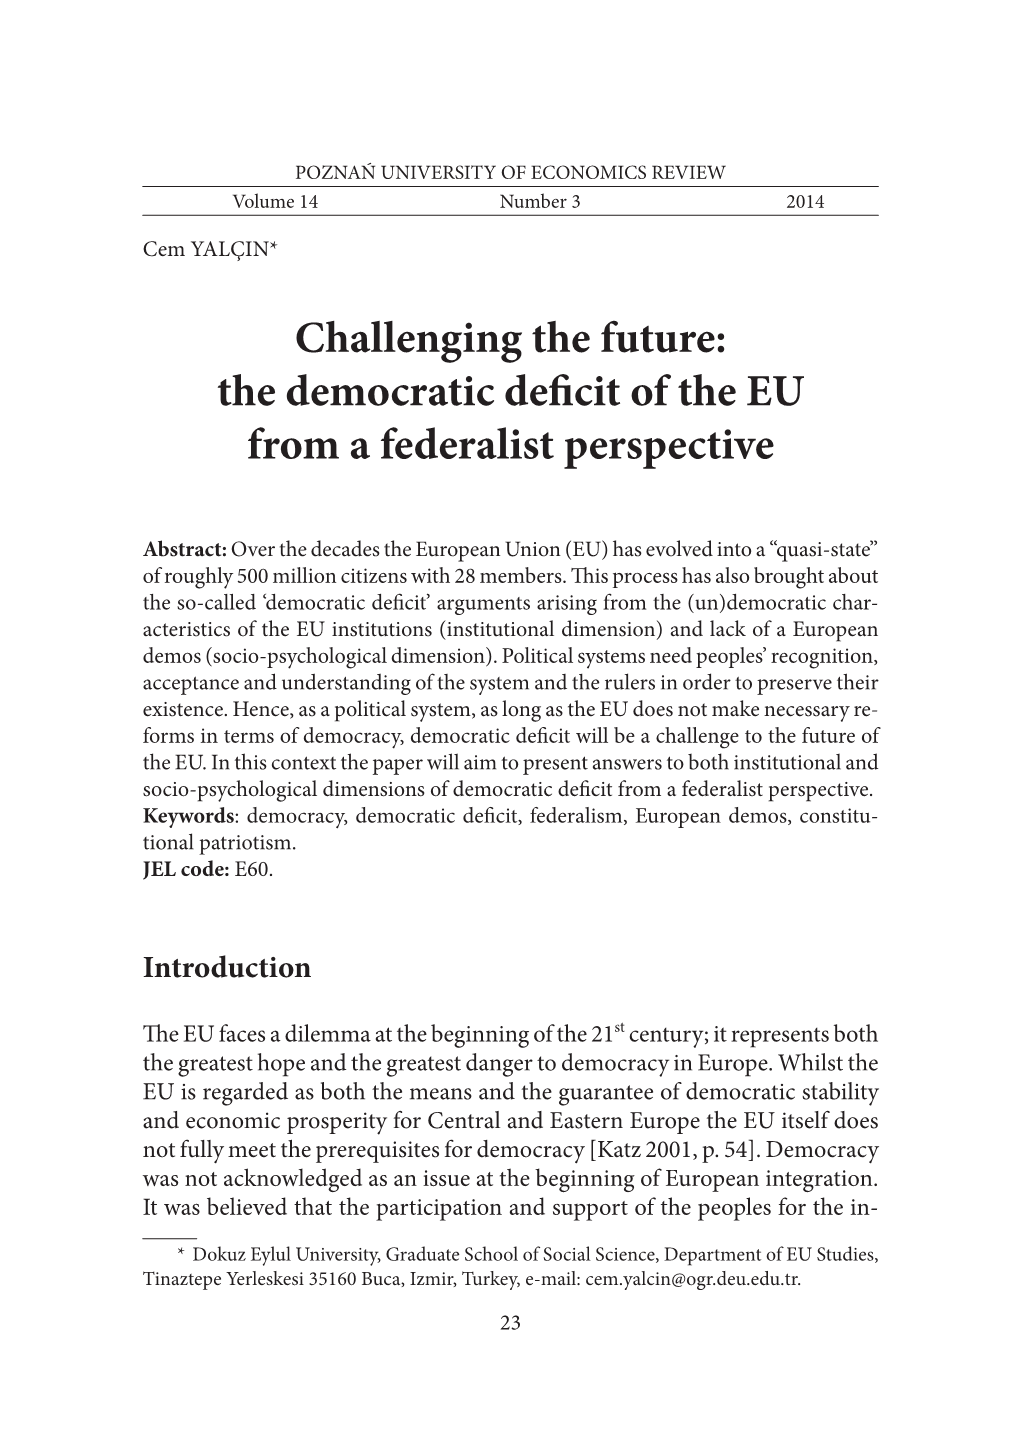 The Democratic Deficit of the EU from a Federalist Perspective